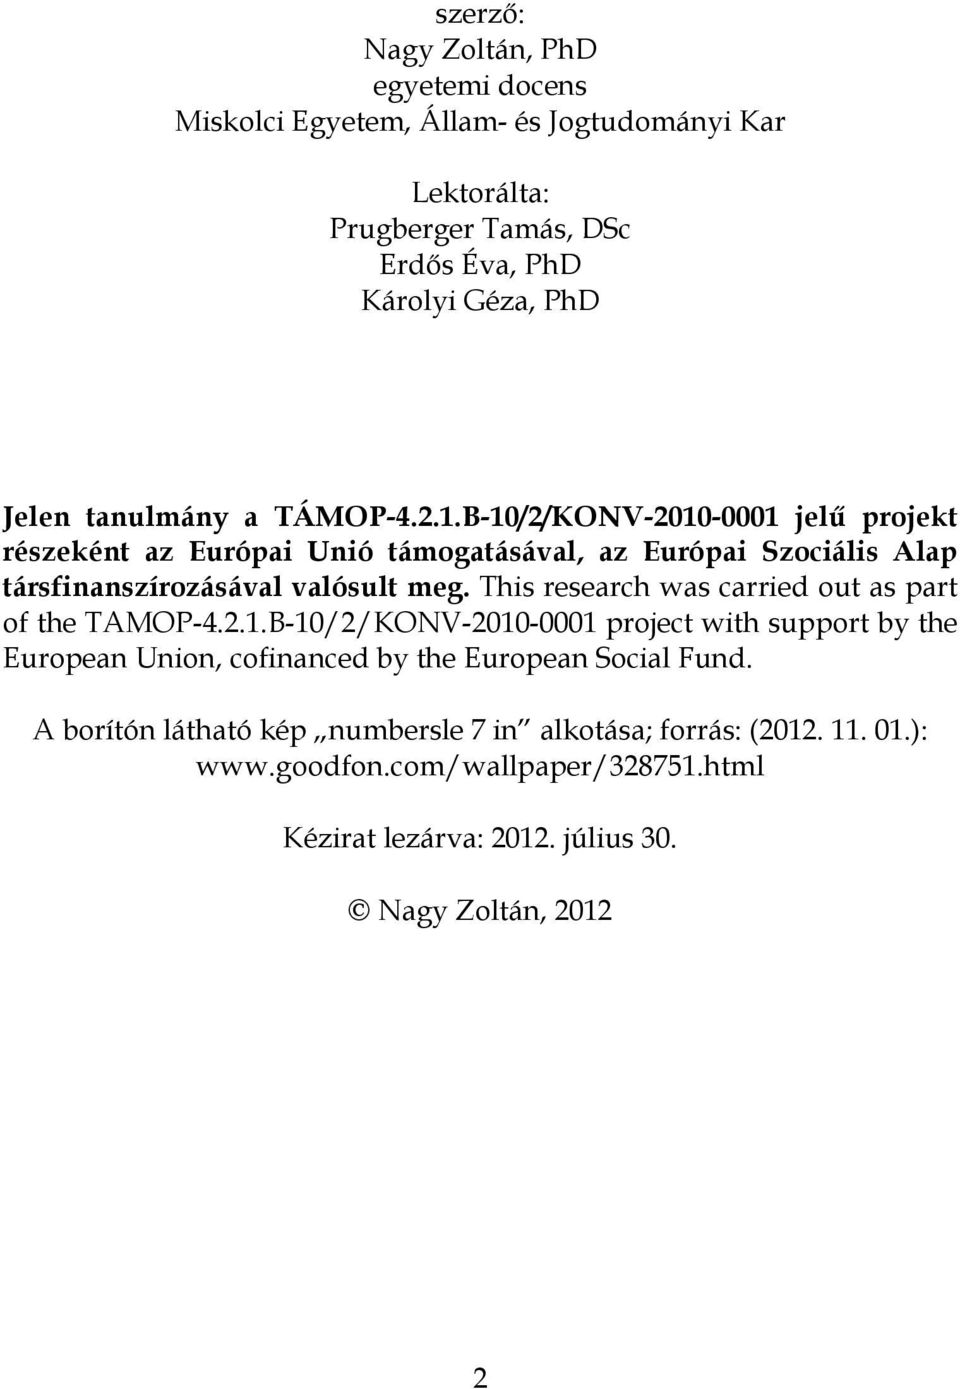 This research was carried out as part of the TAMOP-4.2.1.B-10/2/KONV-2010-0001 project with support by the European Union, cofinanced by the European Social Fund.